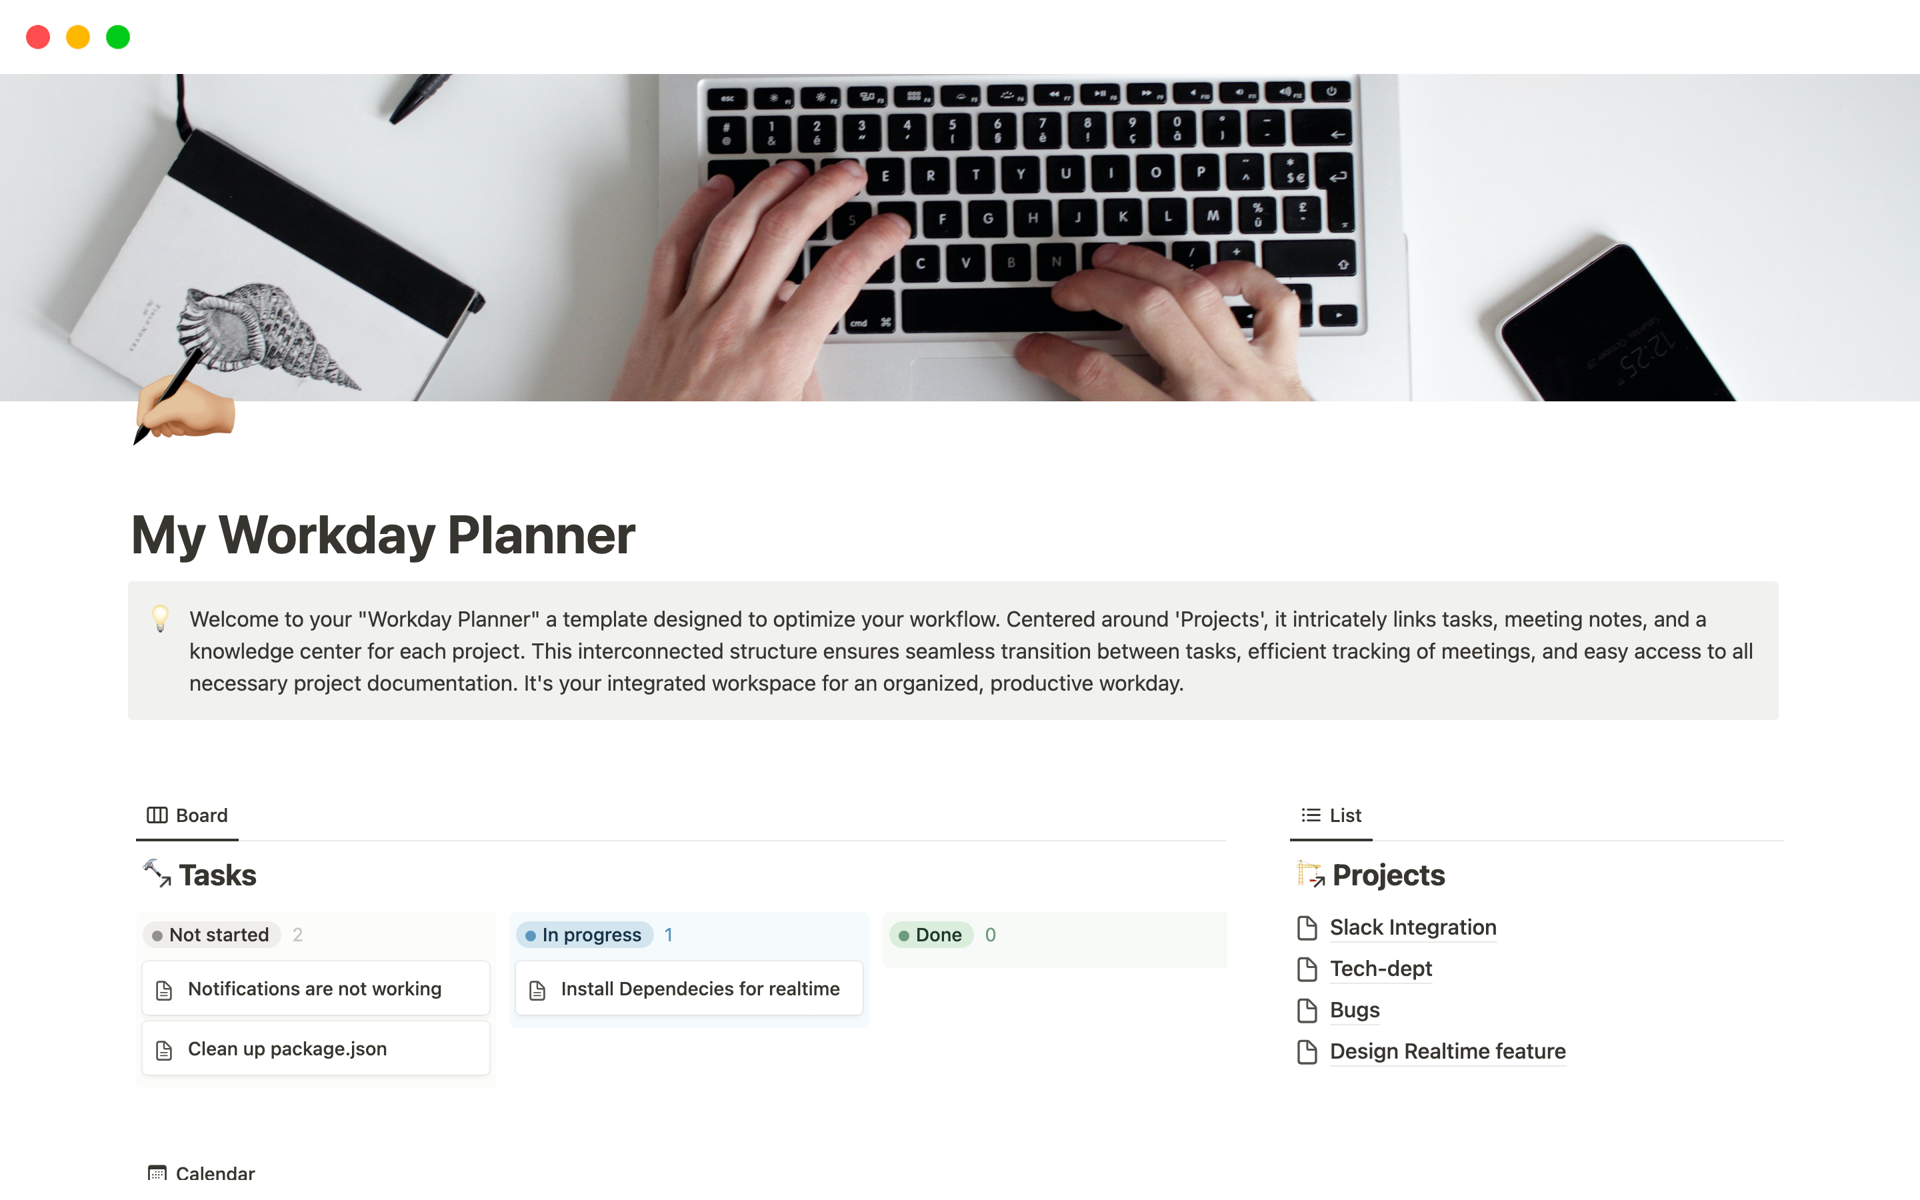 "My Workday Planner" is a one-stop solution, intertwining projects, tasks, meeting notes, and a knowledge center for a comprehensive, organized workday.